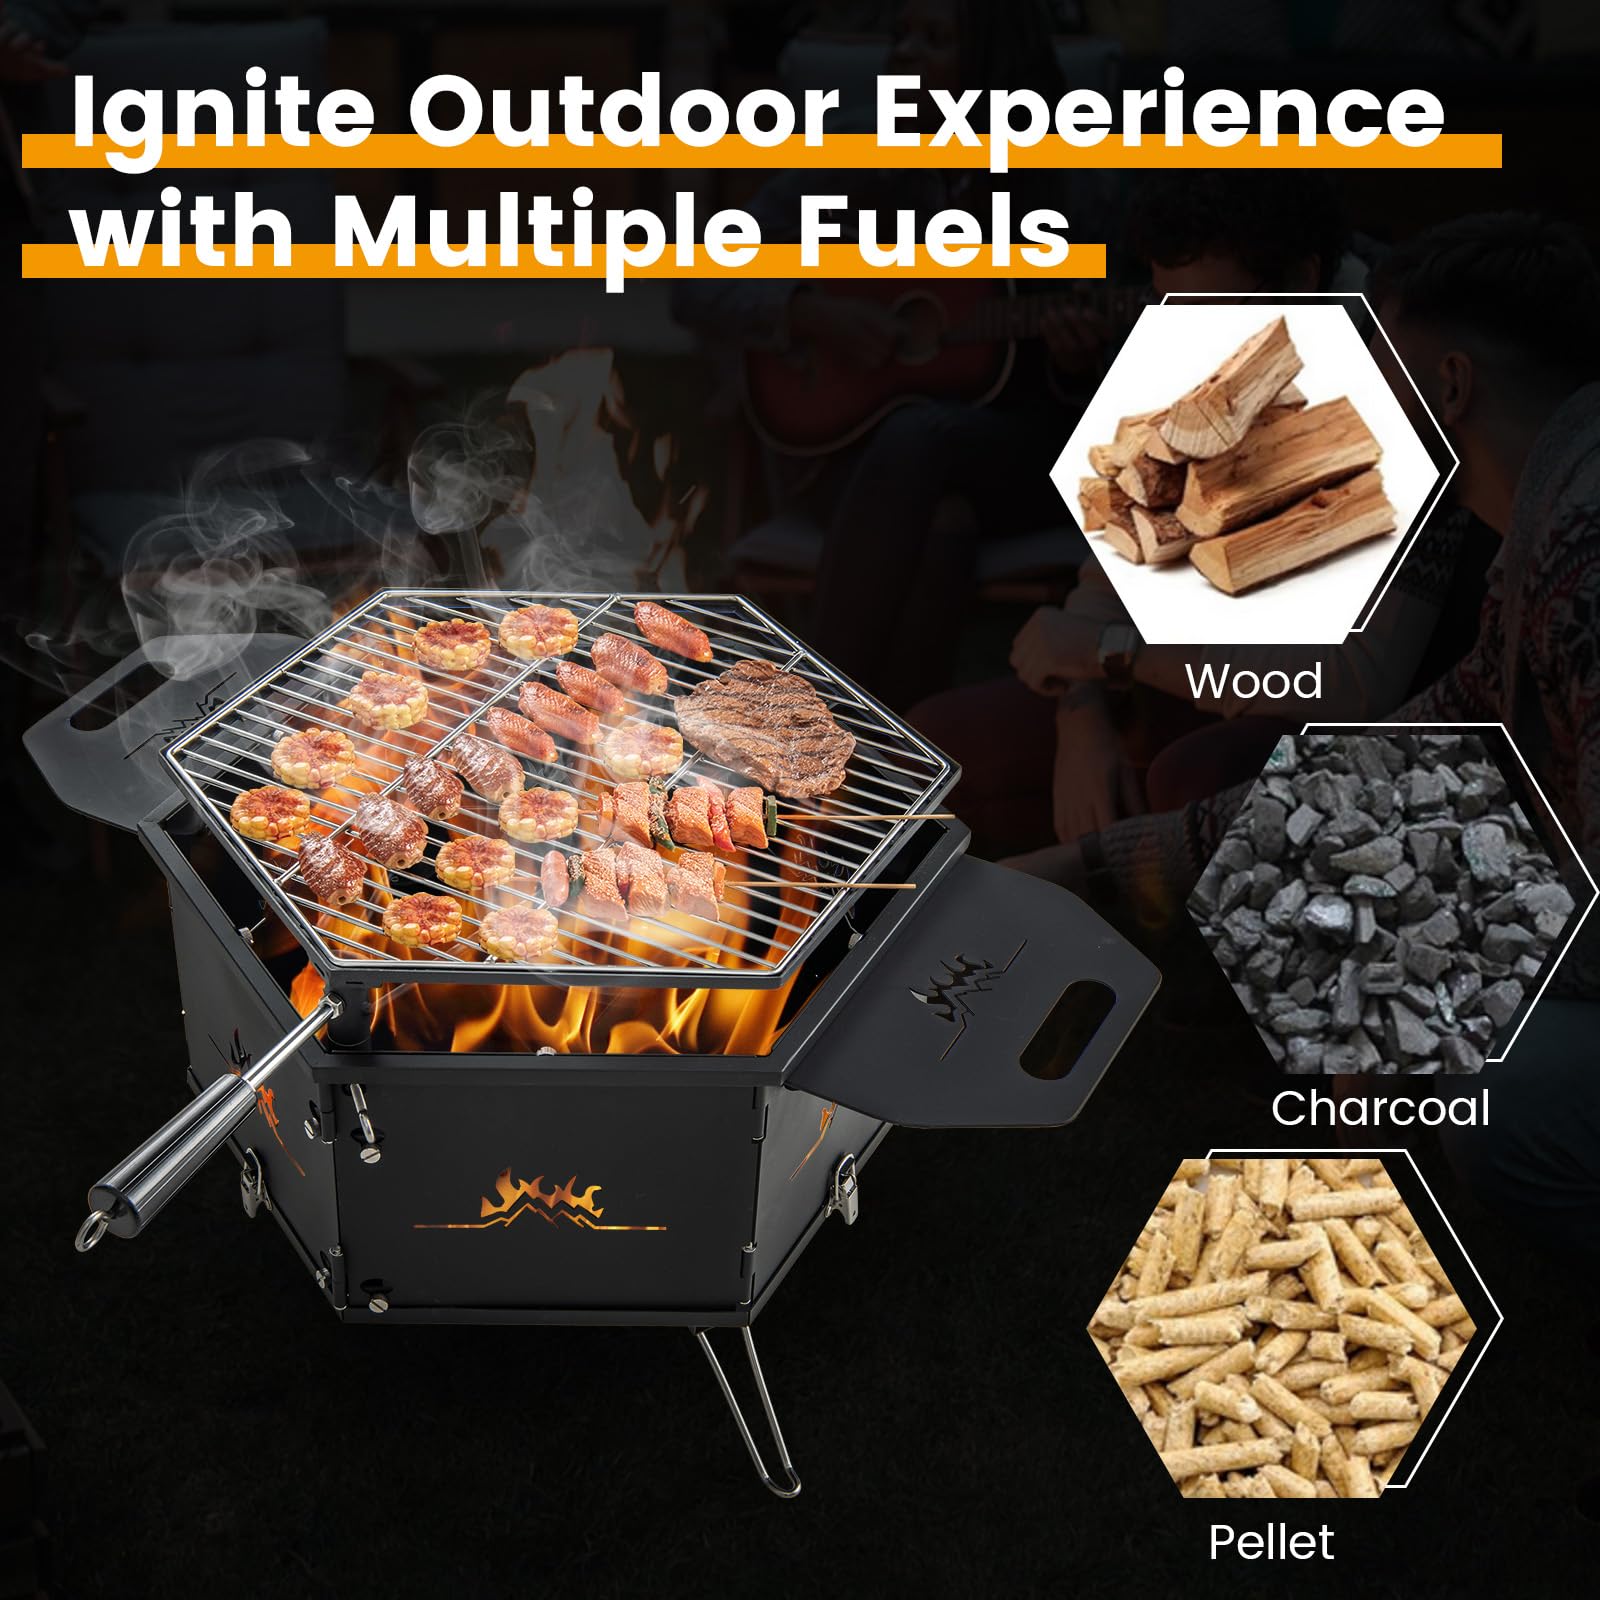 Giantex Fire Pit Grill, Outdoor Fire Pit with Removable 360° Swivel Cooking Grate